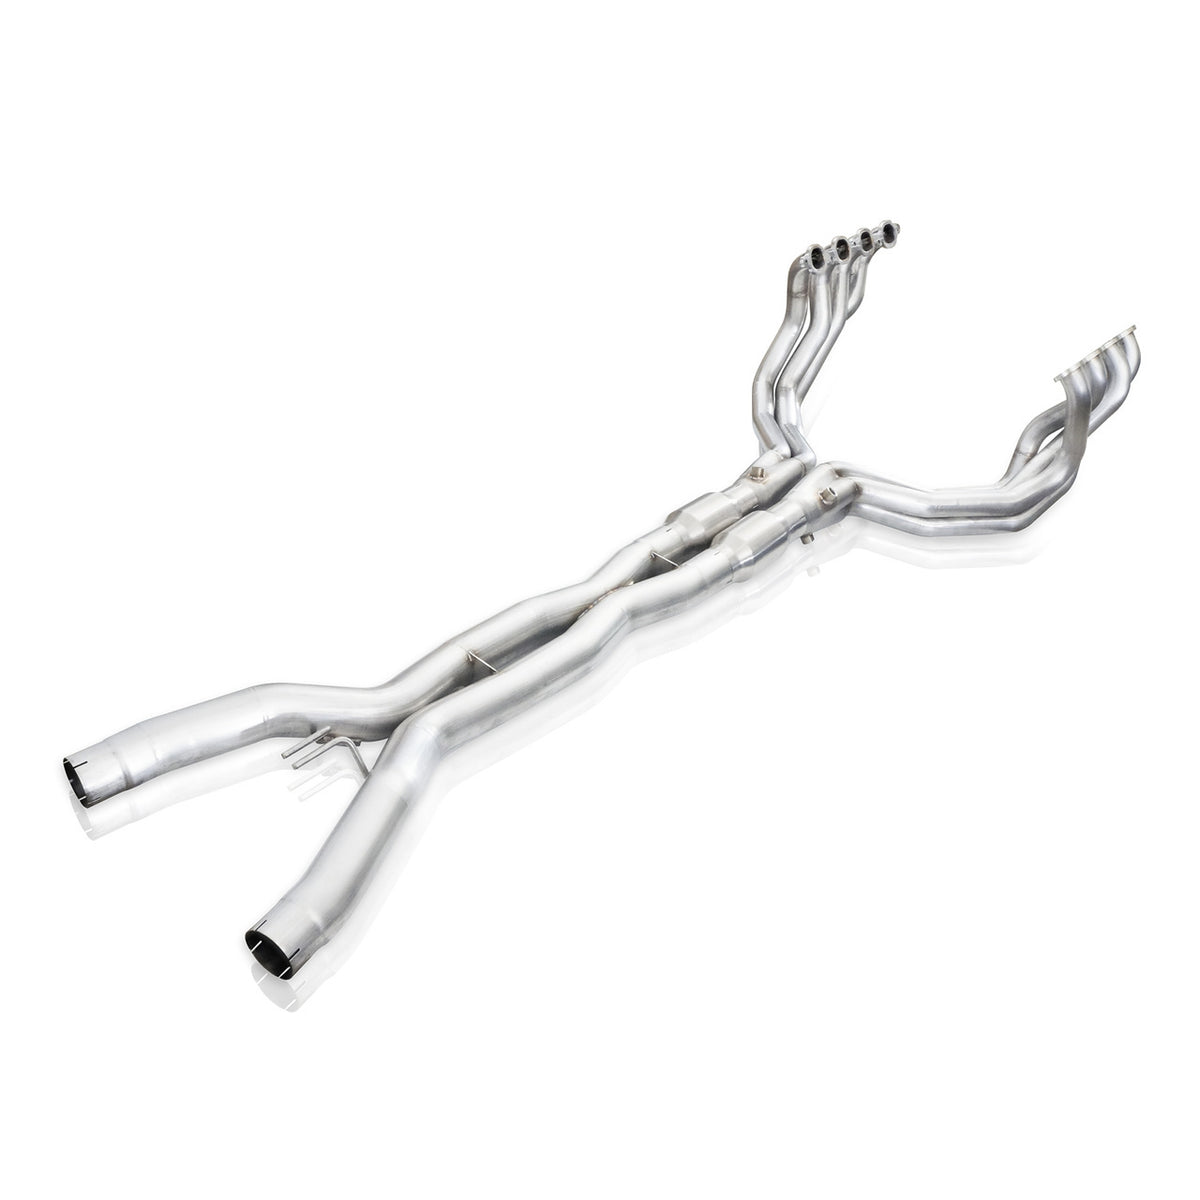 2014-2018 CORVETTE C7 1-7/8" HEADERS WITH CATTED X- PIPE, STAINLESS WORKS